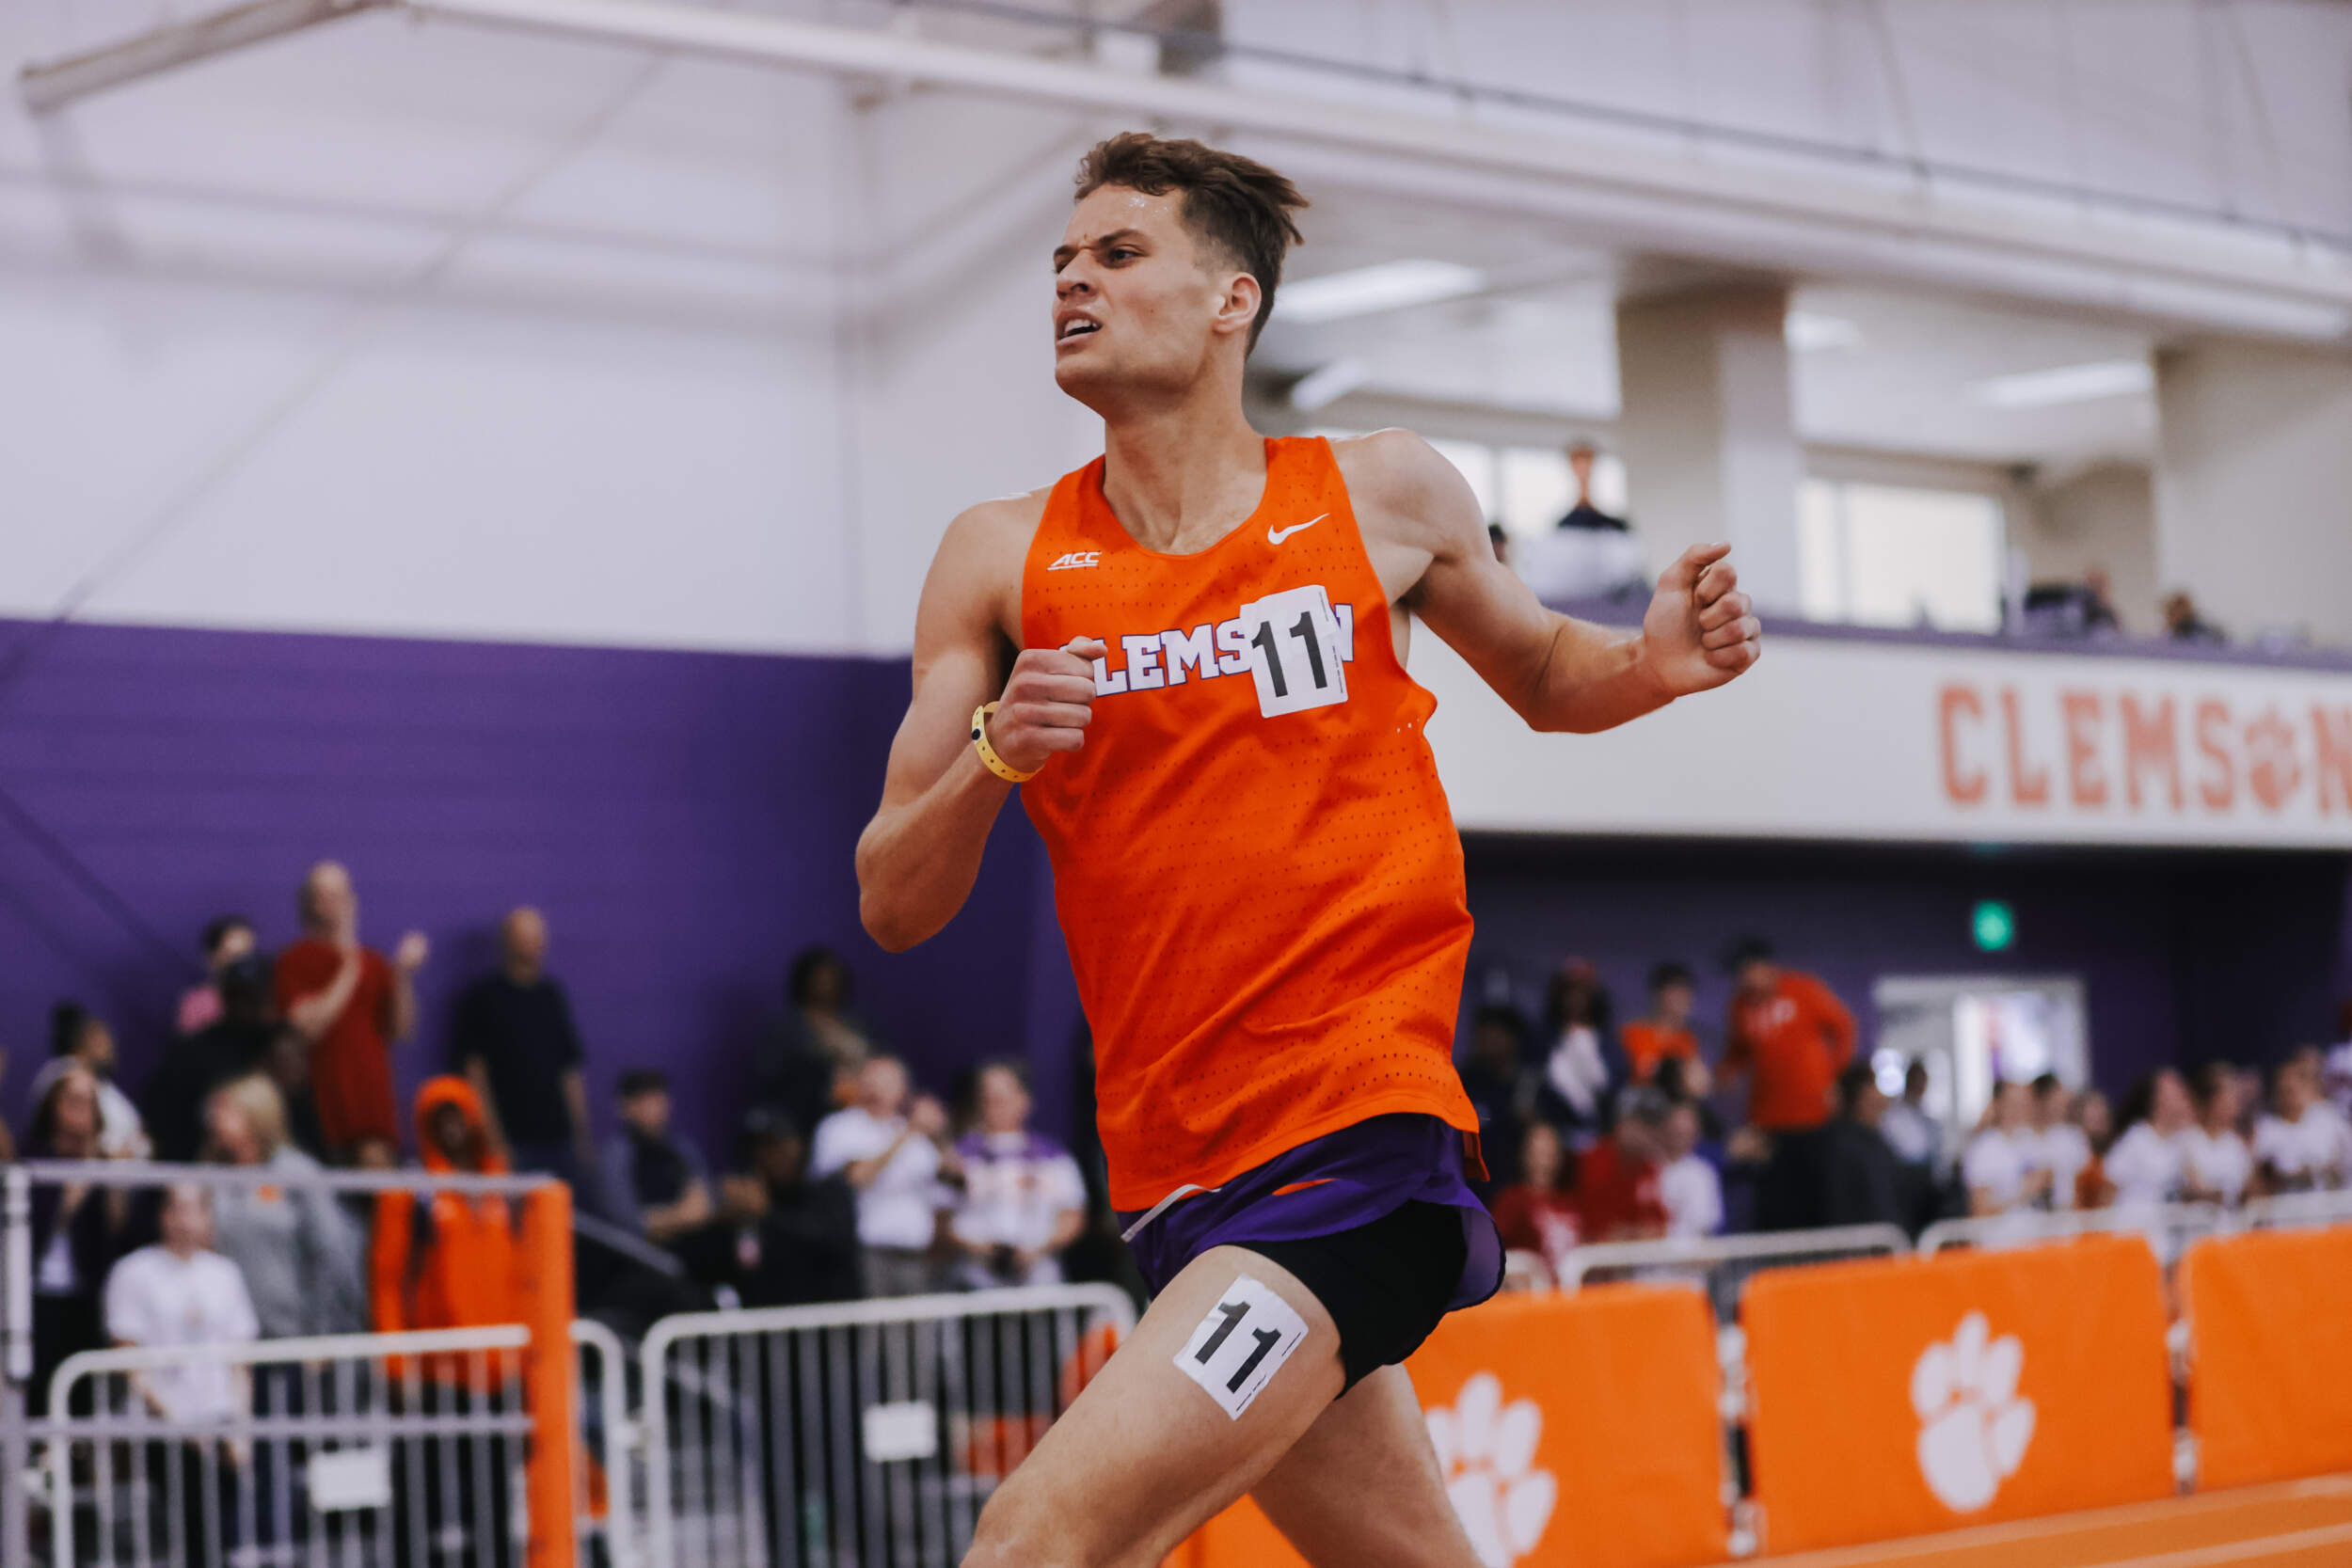 Cope Sets School Record, Tigers Complete First Day of Bob Pollock